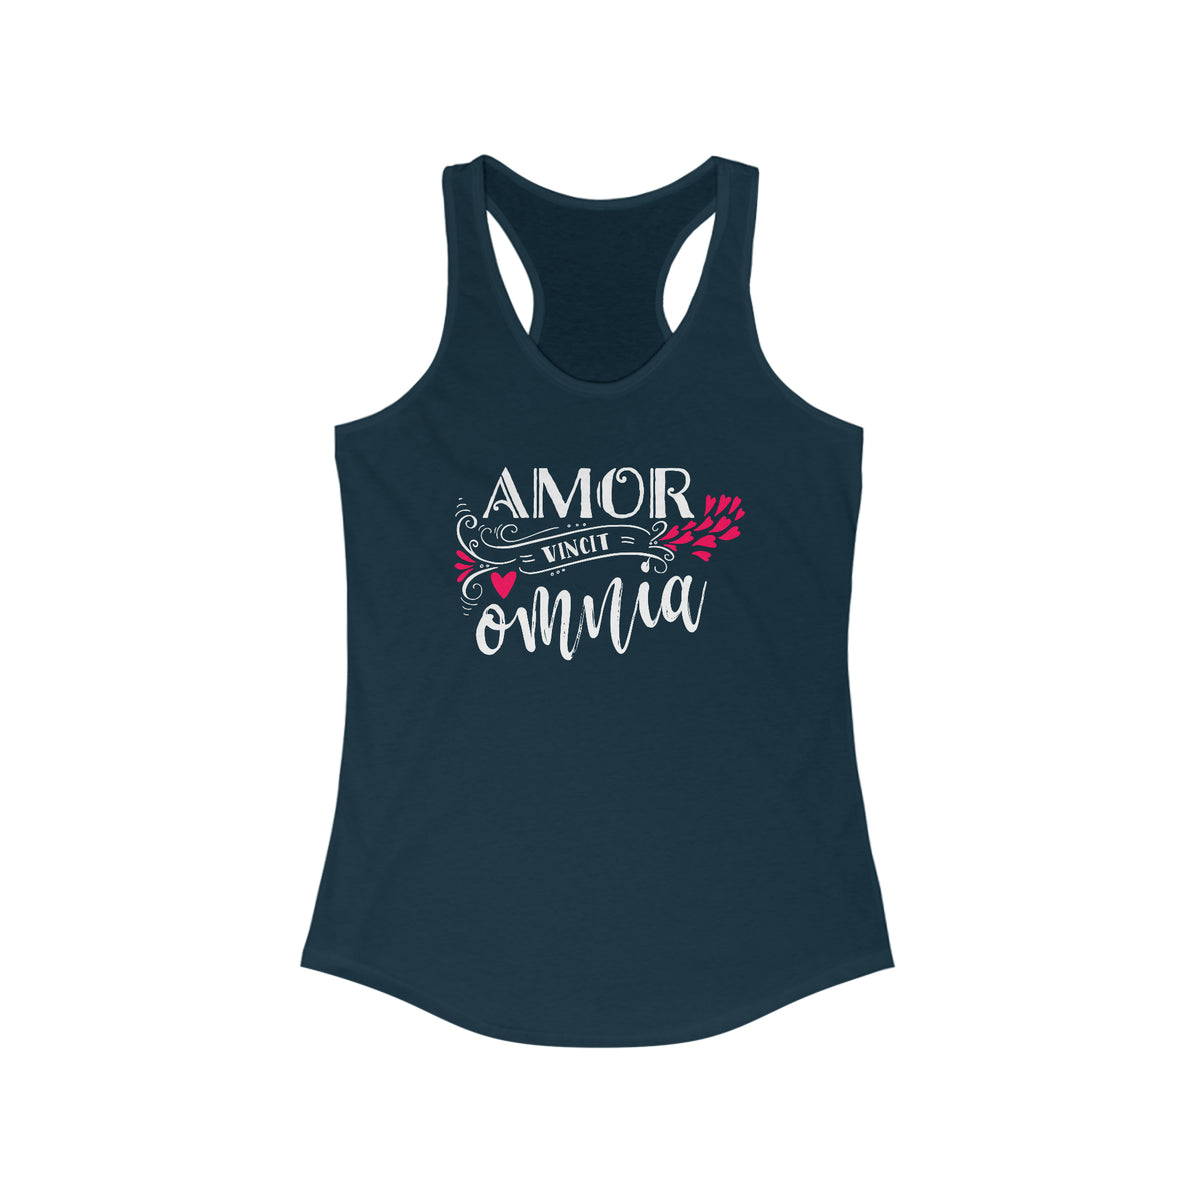 Love Conquers All Valentine Heart Shirt | Valentine Gift | Women's Slim-fit Racerback Tank Top